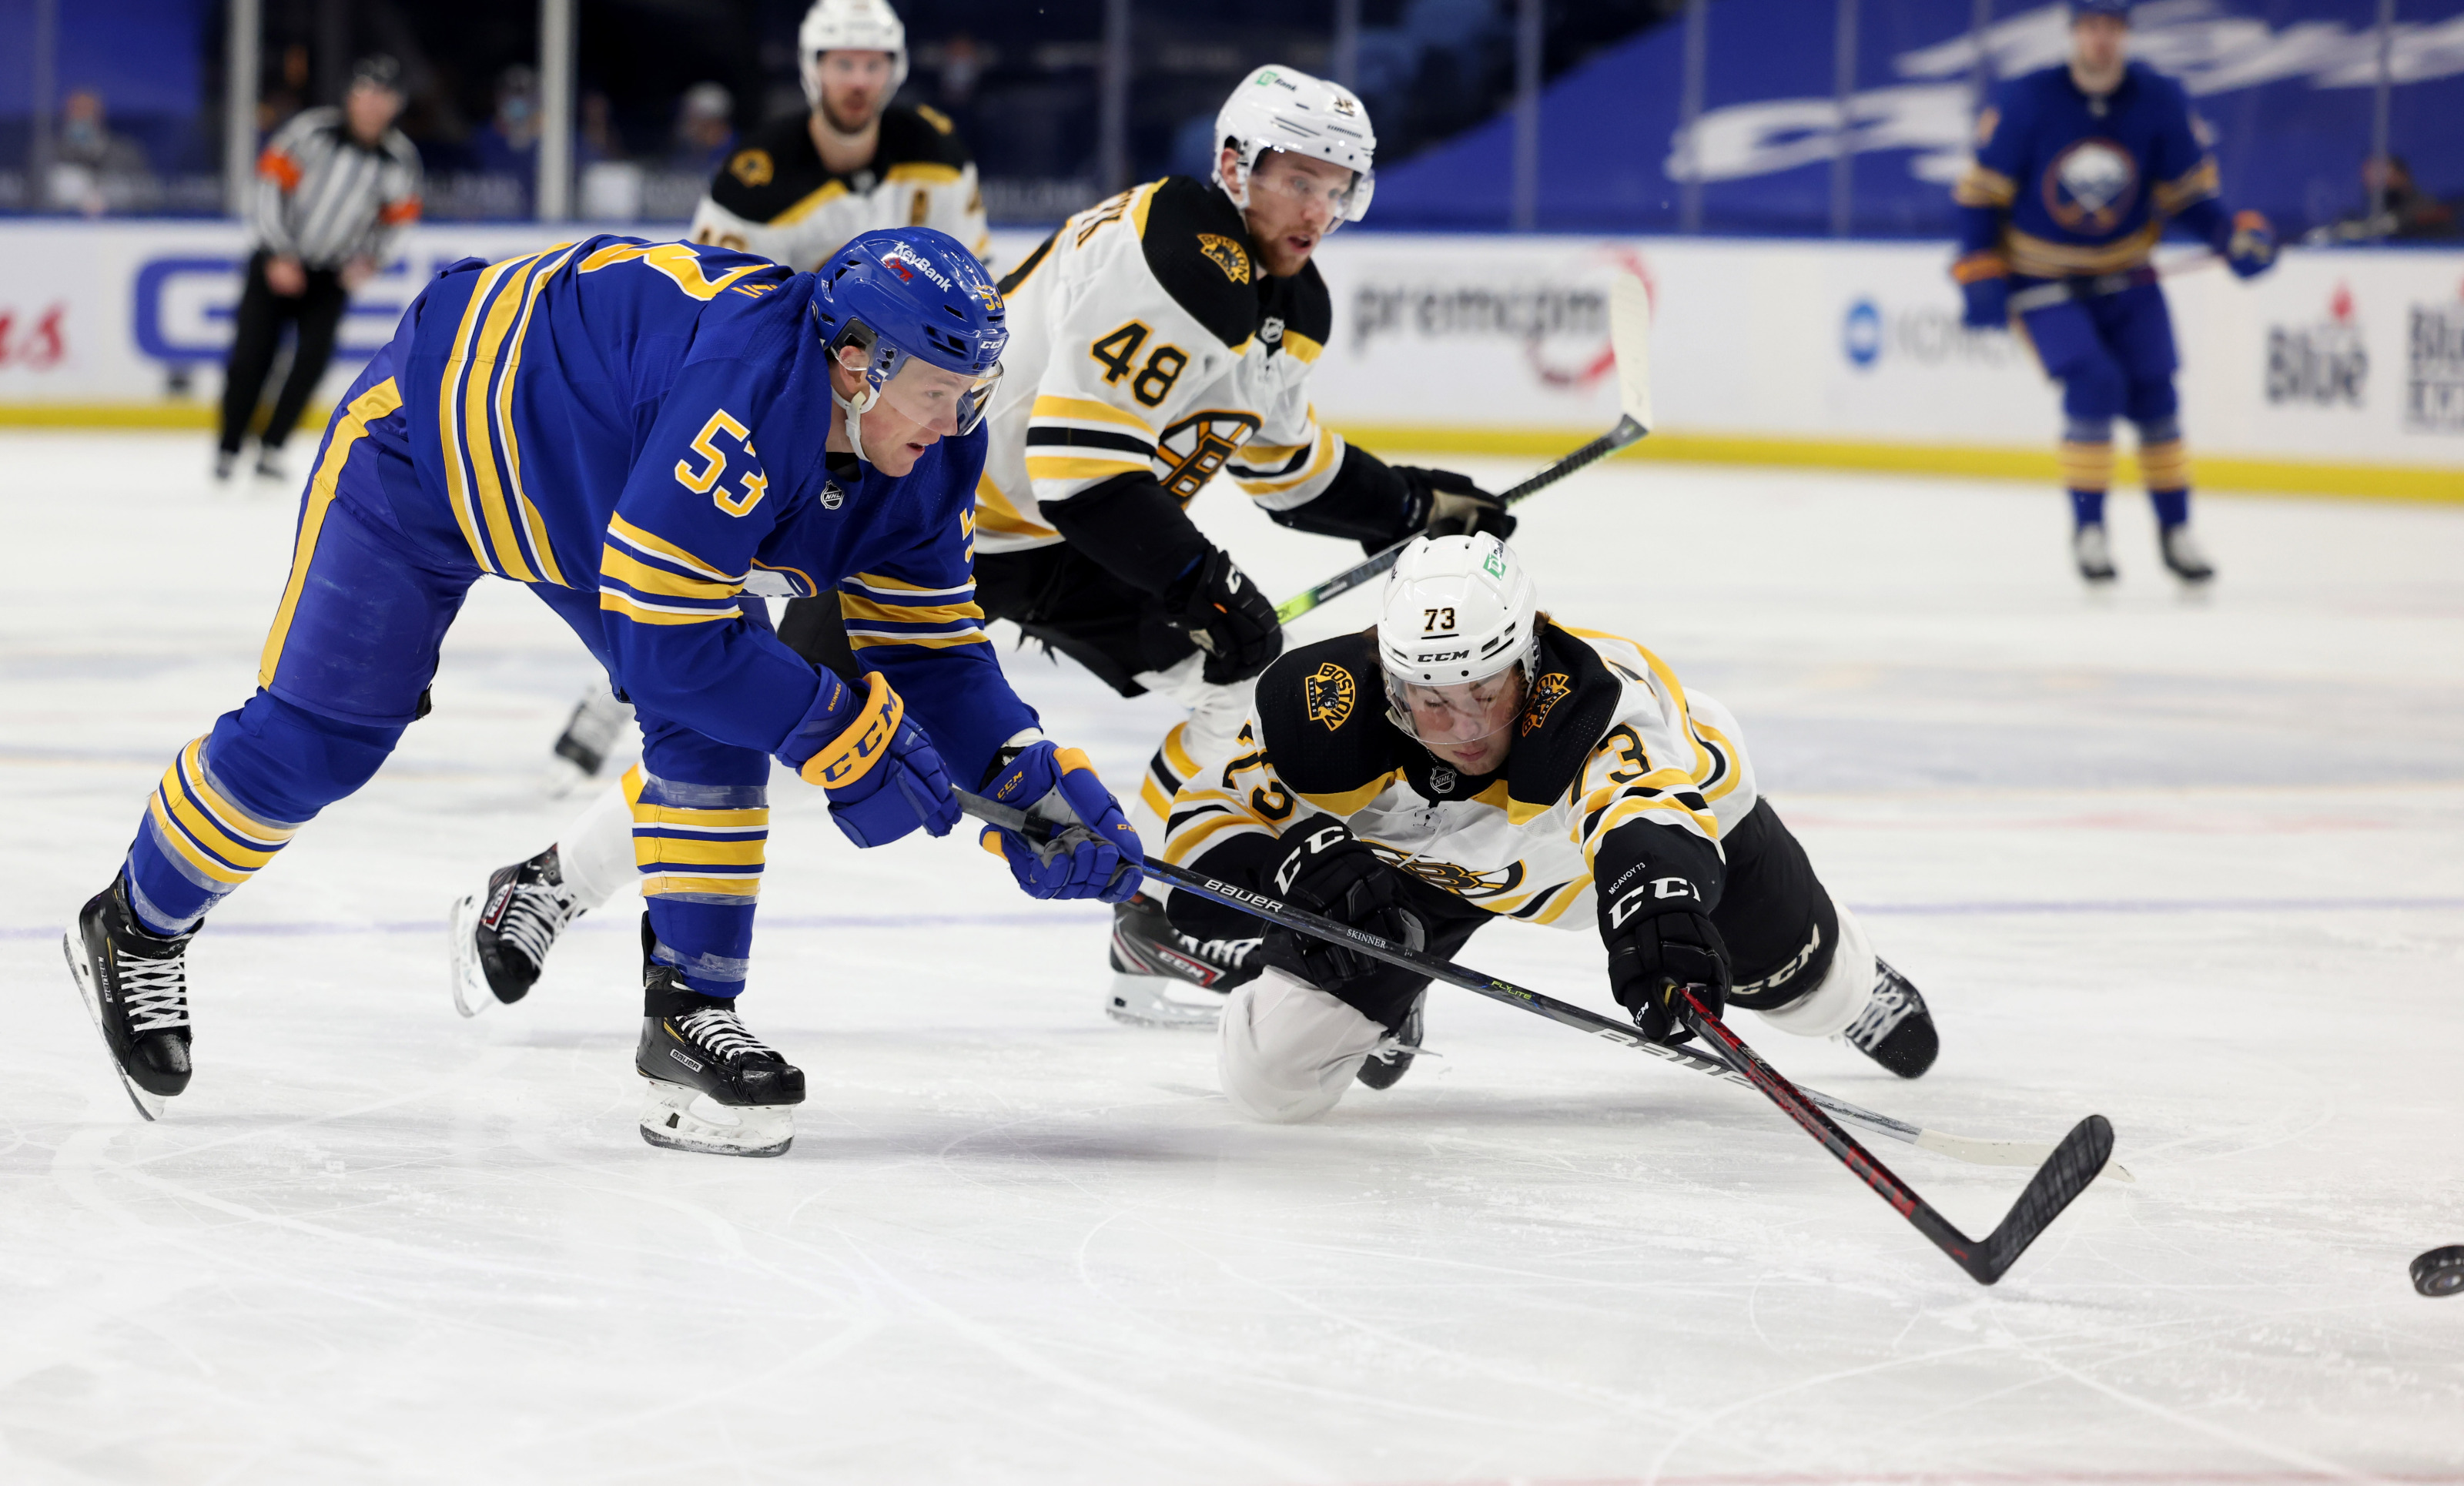 Sabres vs Bruins Date, Time, Streaming, and More